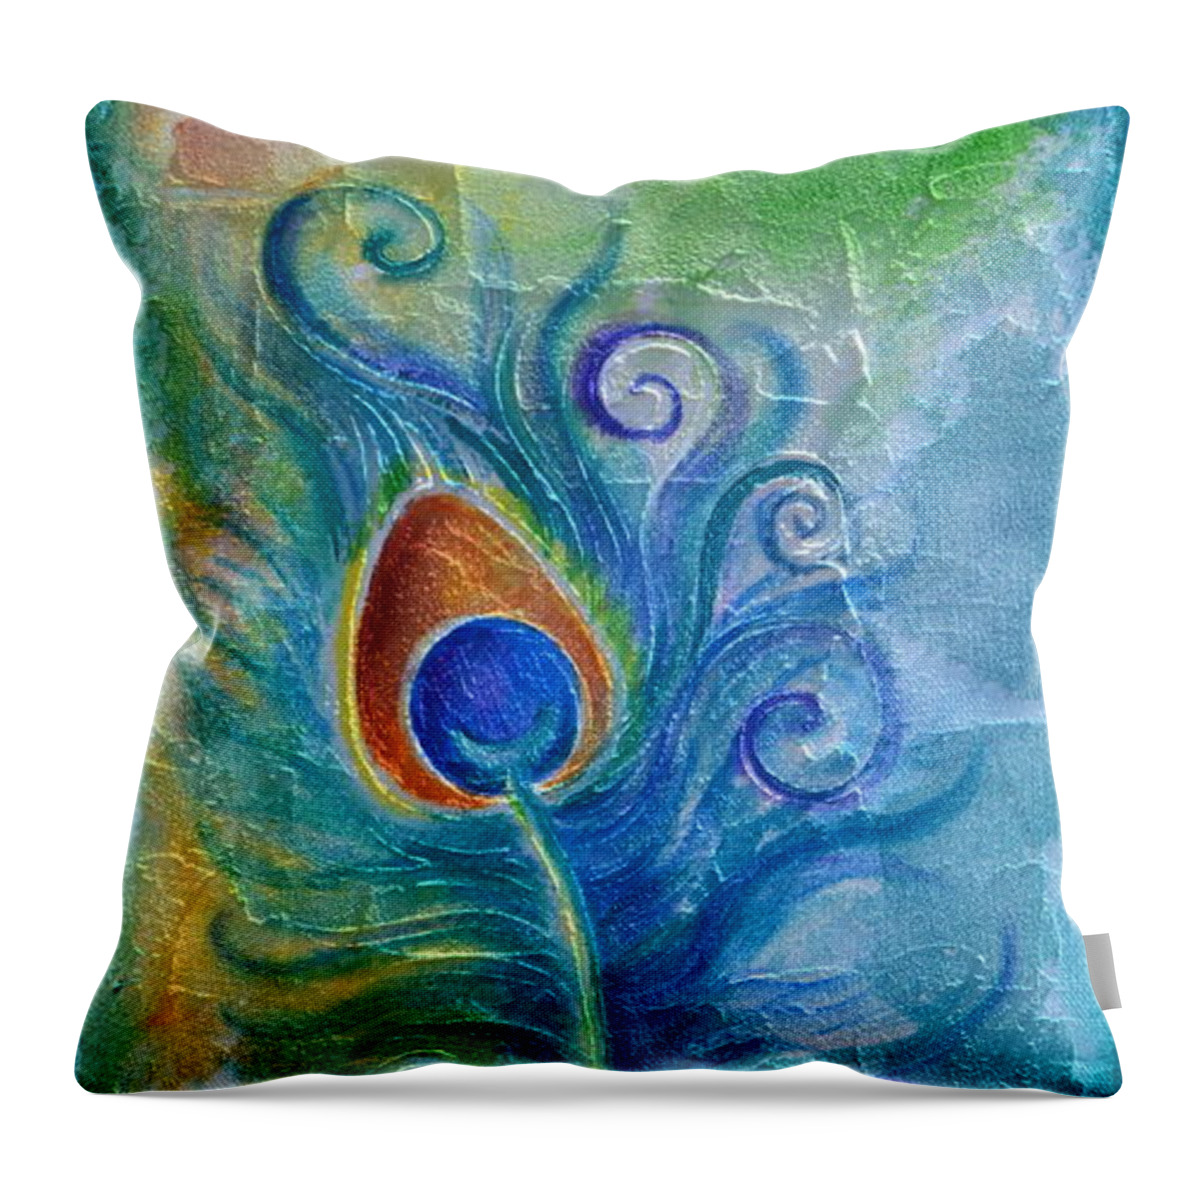 Peacock Throw Pillow featuring the painting Peacock Feather Mural by Agata Lindquist